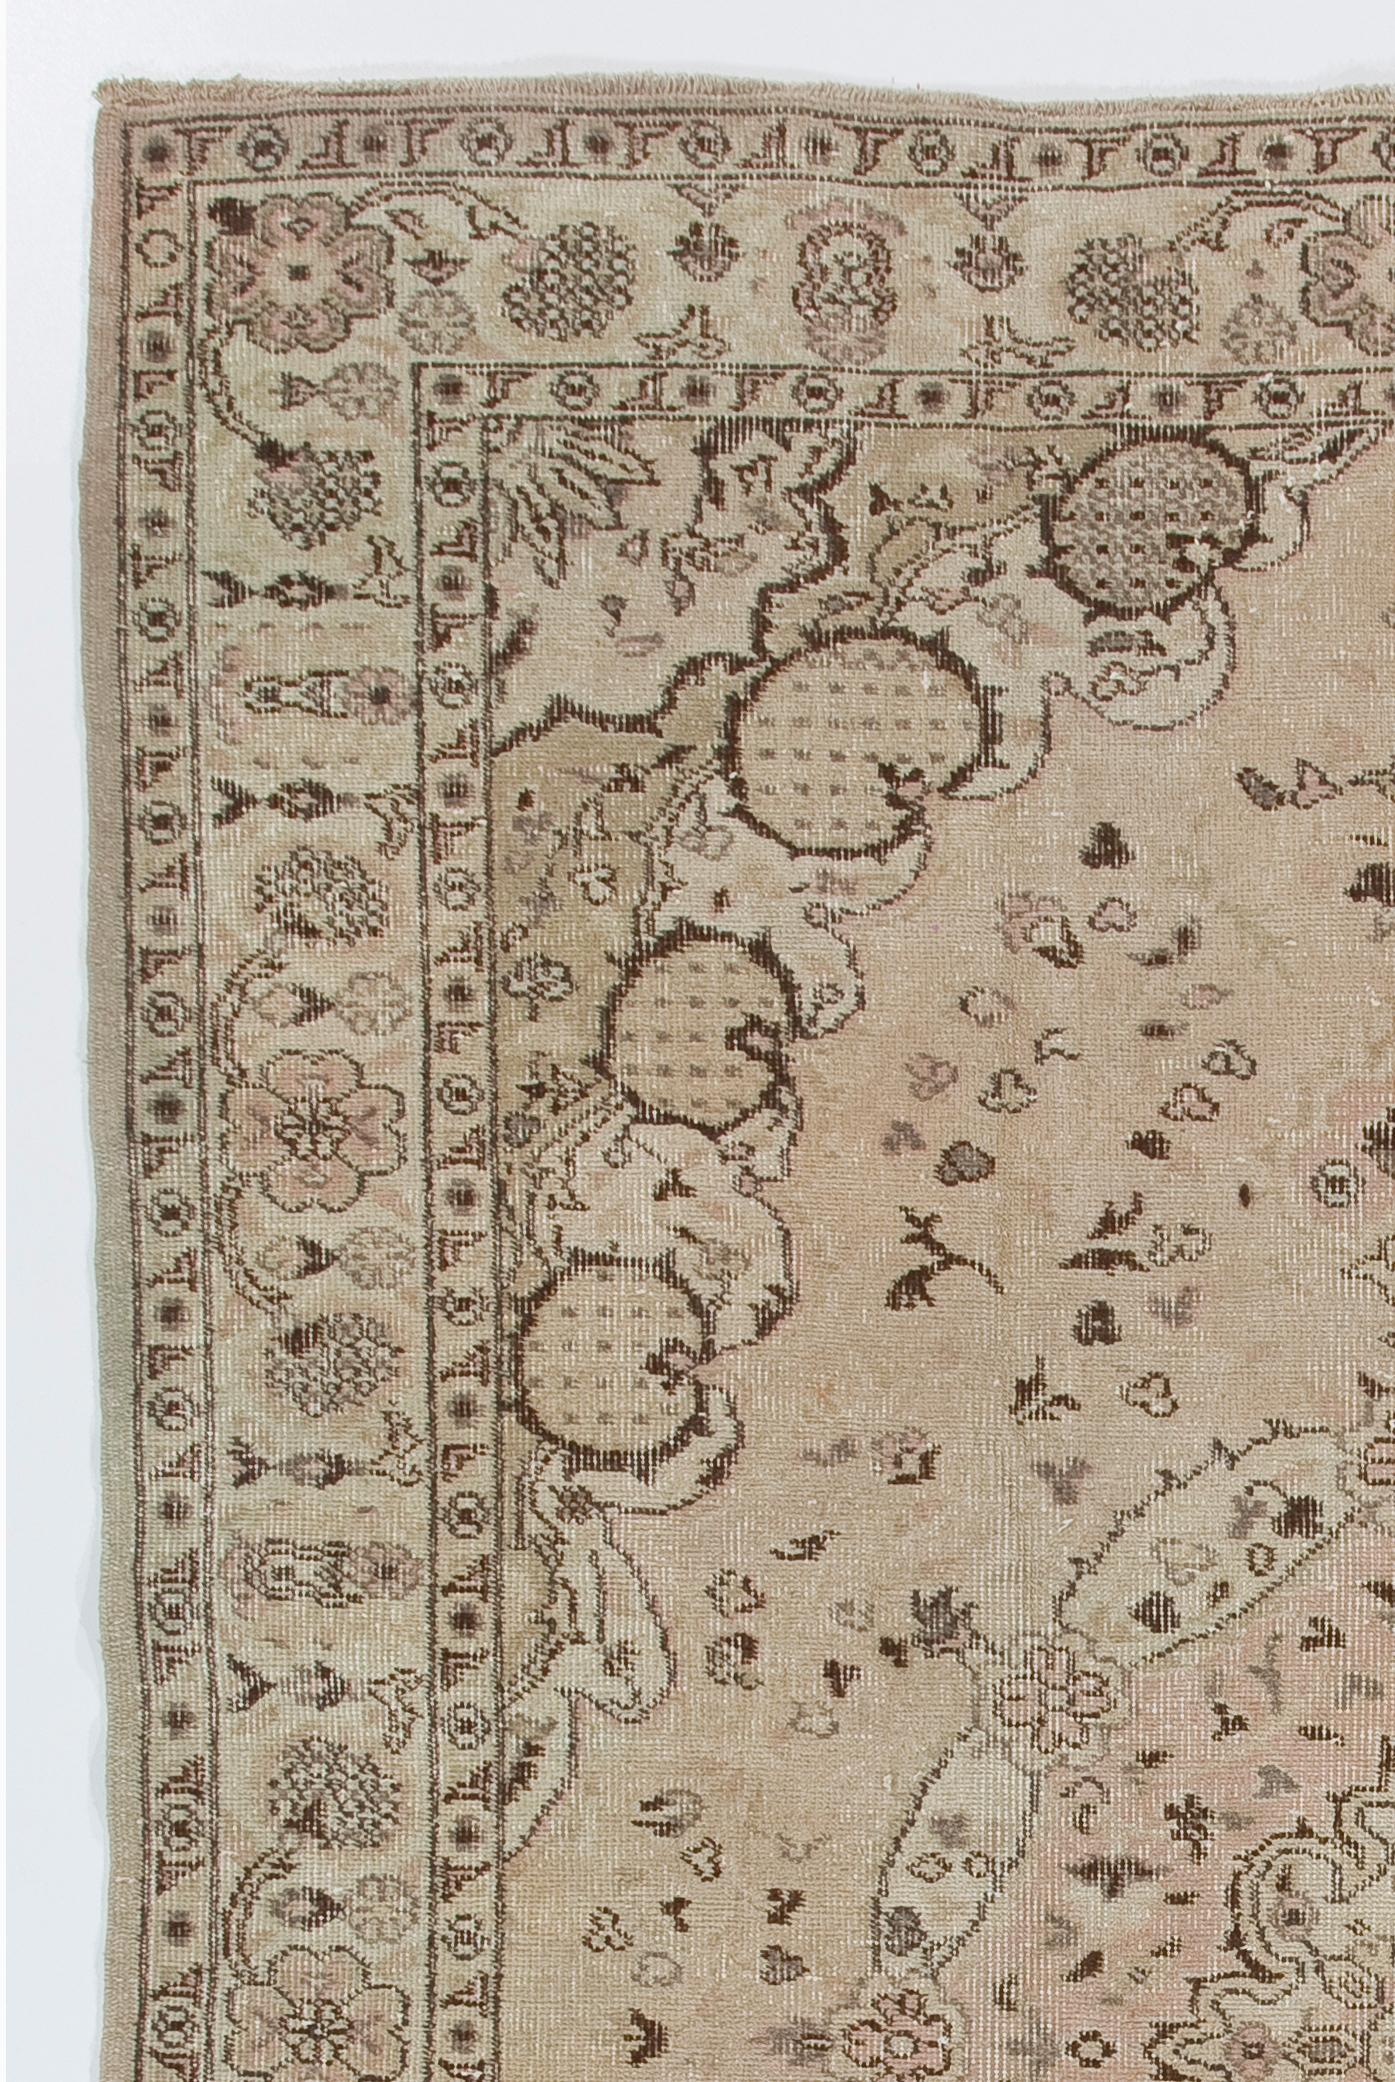 This one-of-a-kind vintage Turkish area rug is finely hand-knotted with low wool pile on cotton foundation. It features an elegant medallion against a field decorated with floating delicate petals framed by corner pieces with pomegranate-like motifs